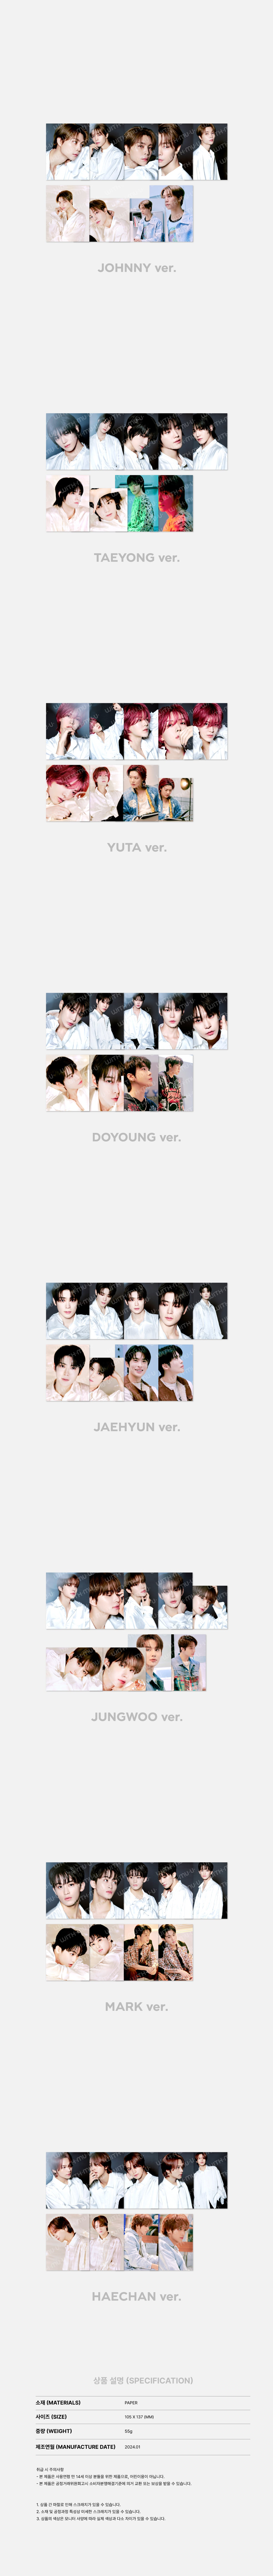 NCT 127 - Photo Pack [3rd Tour NEO CITY : SEOUL - THE UNITY 